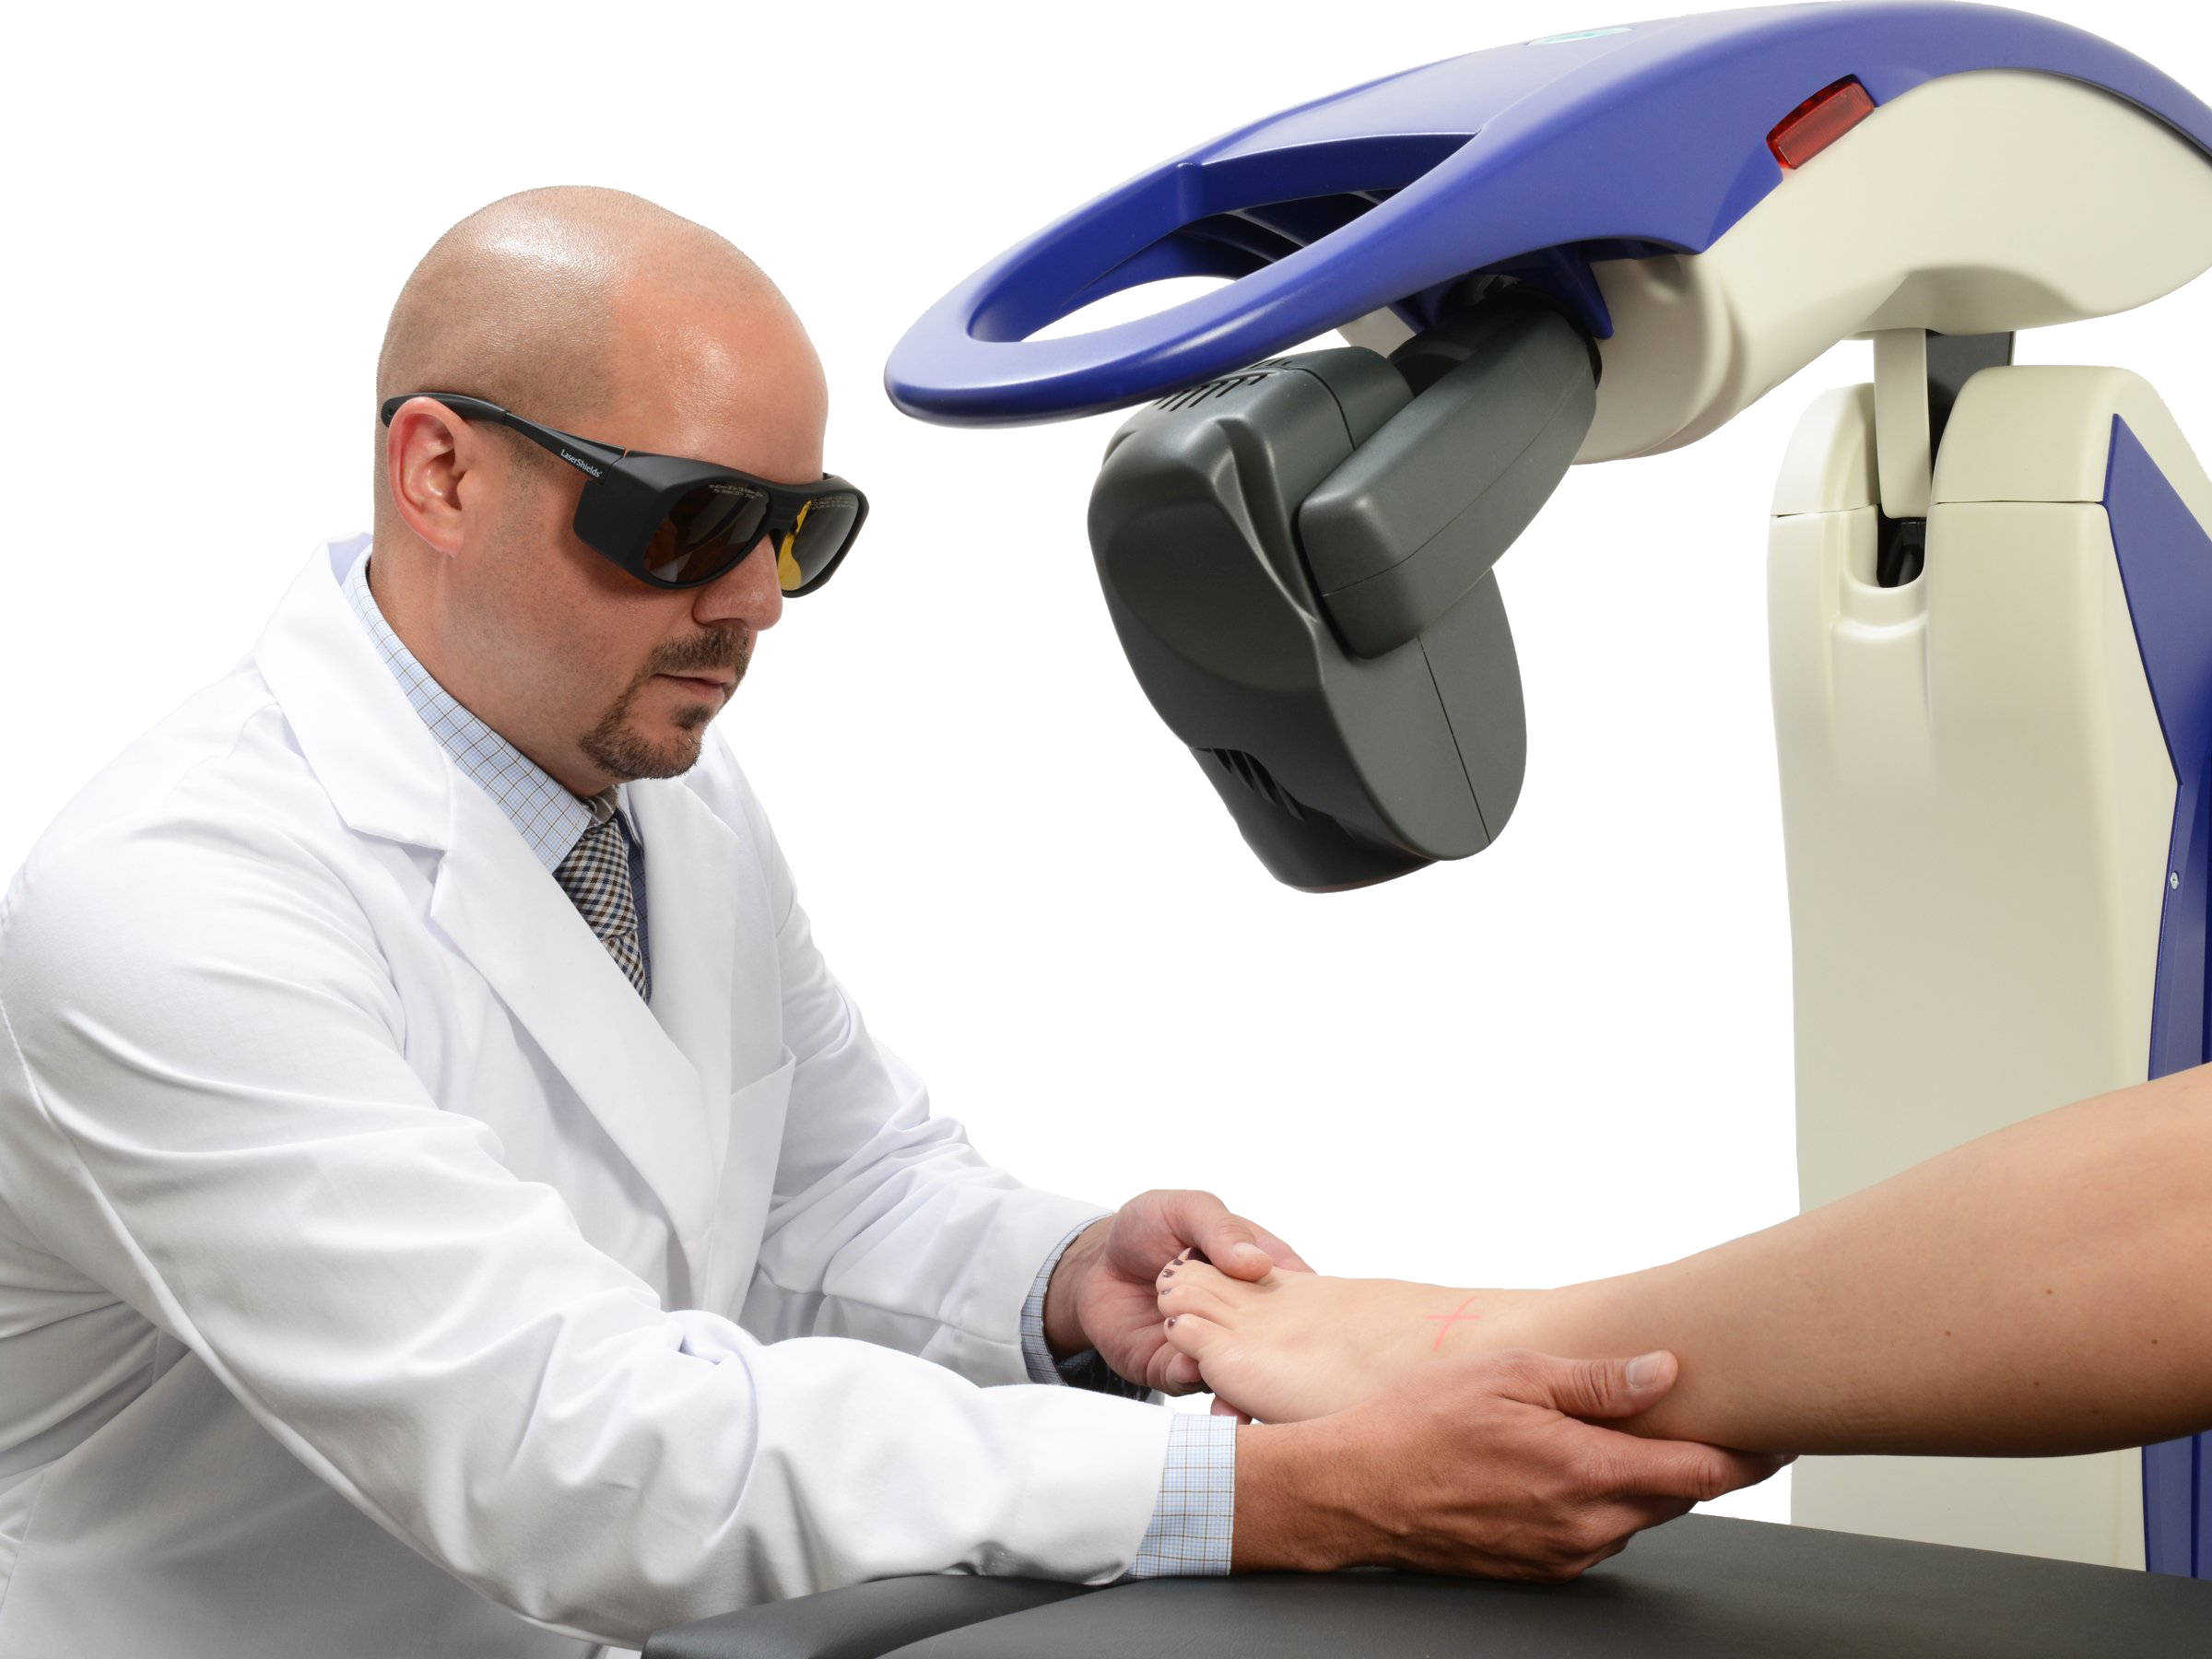 A Podiatrist is treating a patient's food with the Robotic M6 MLS Therapy Laser